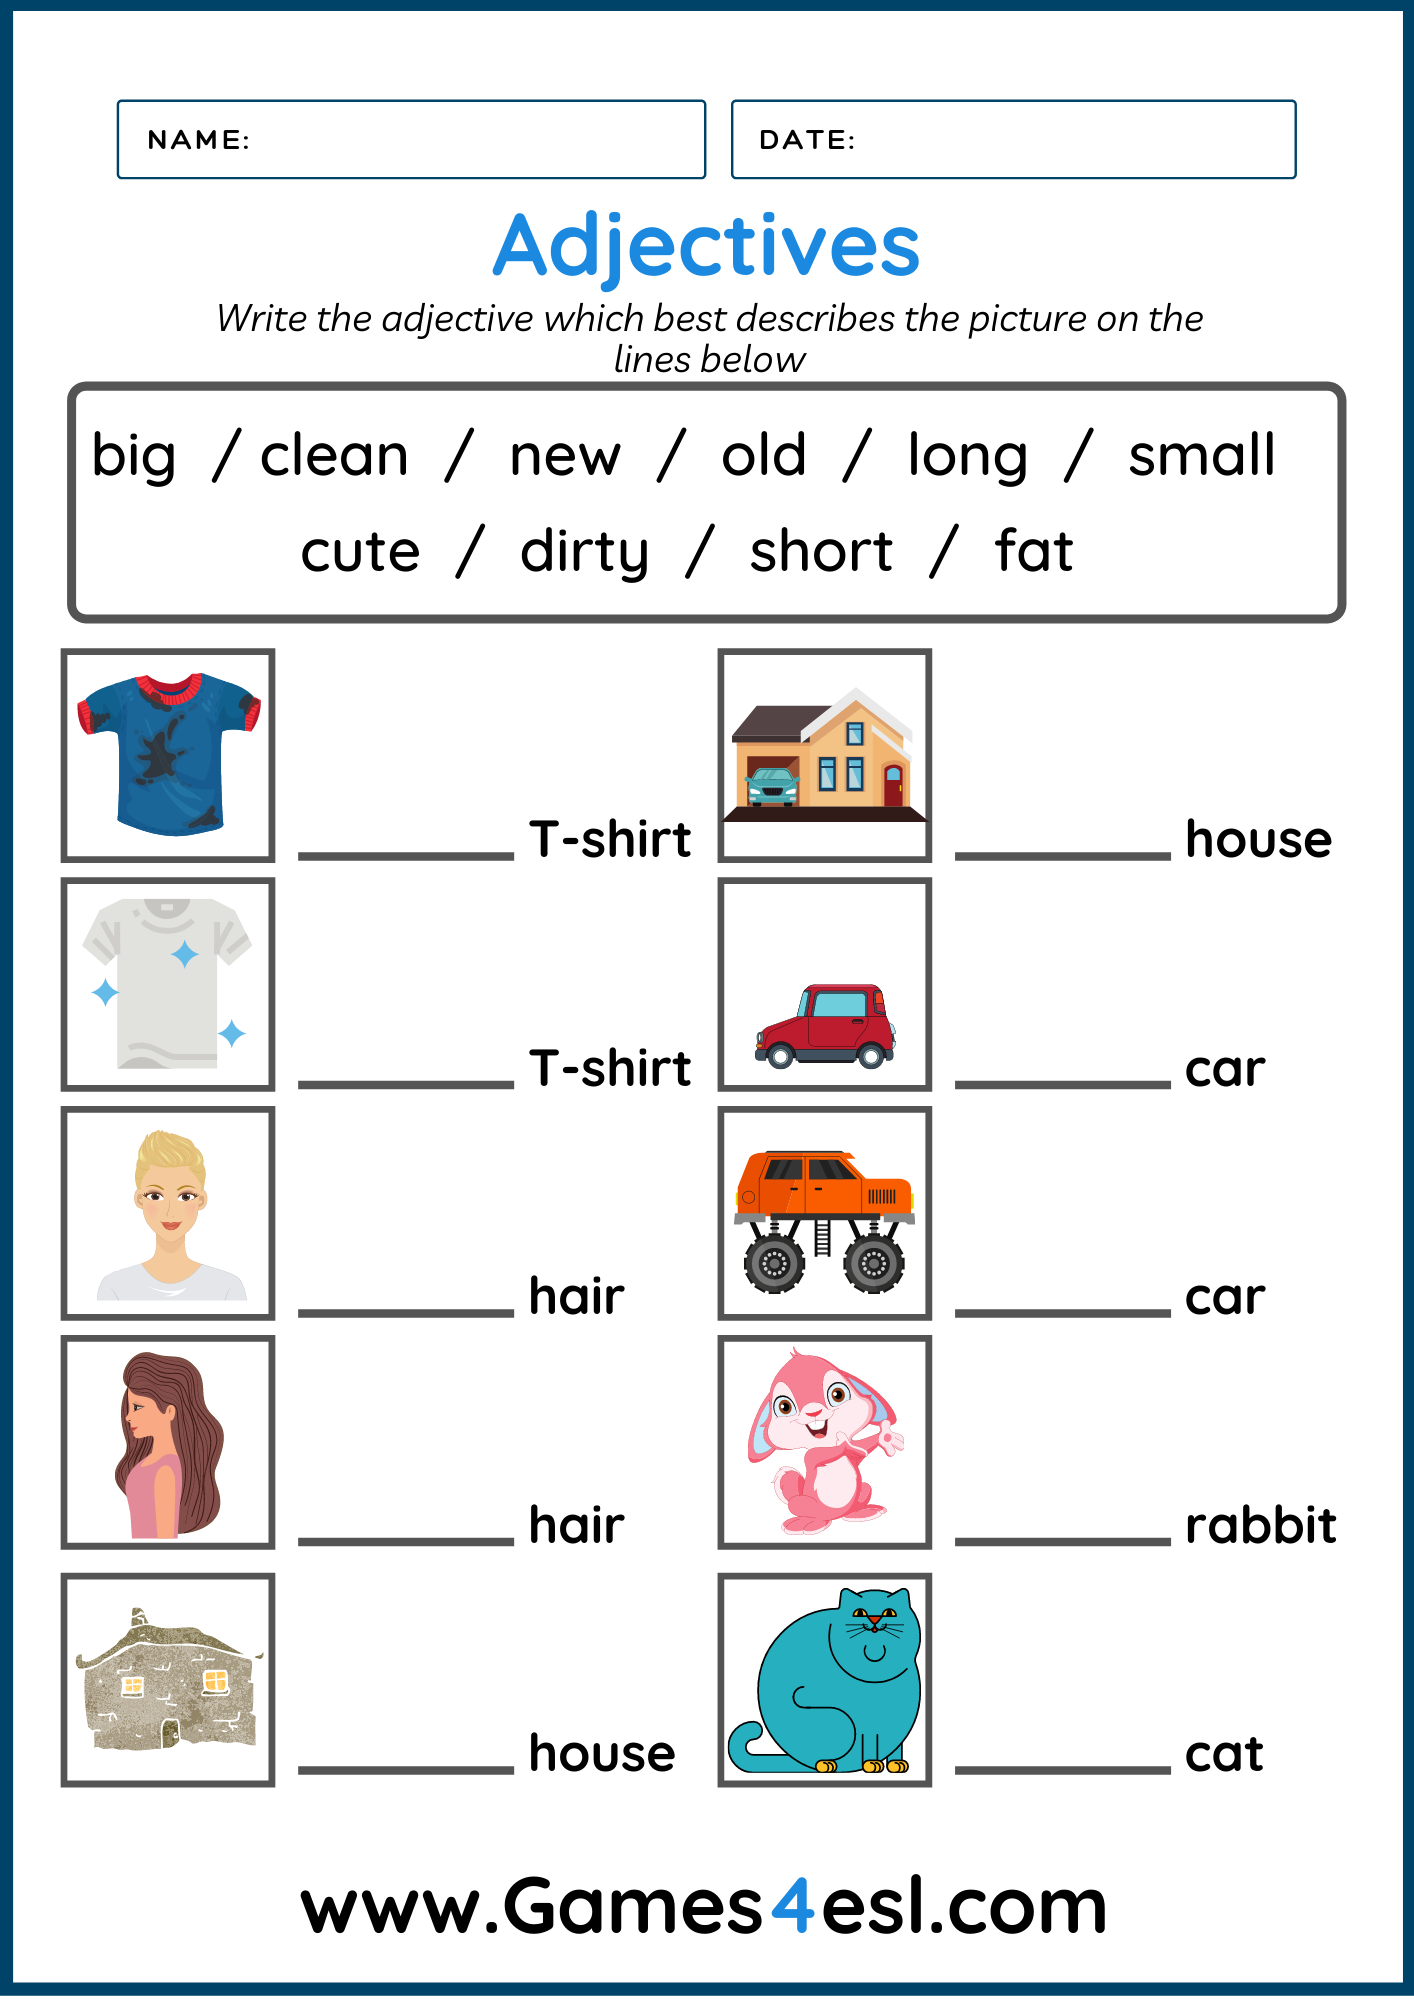 Teach Adjectives With These Fun Adjective Worksheets For Kids Download